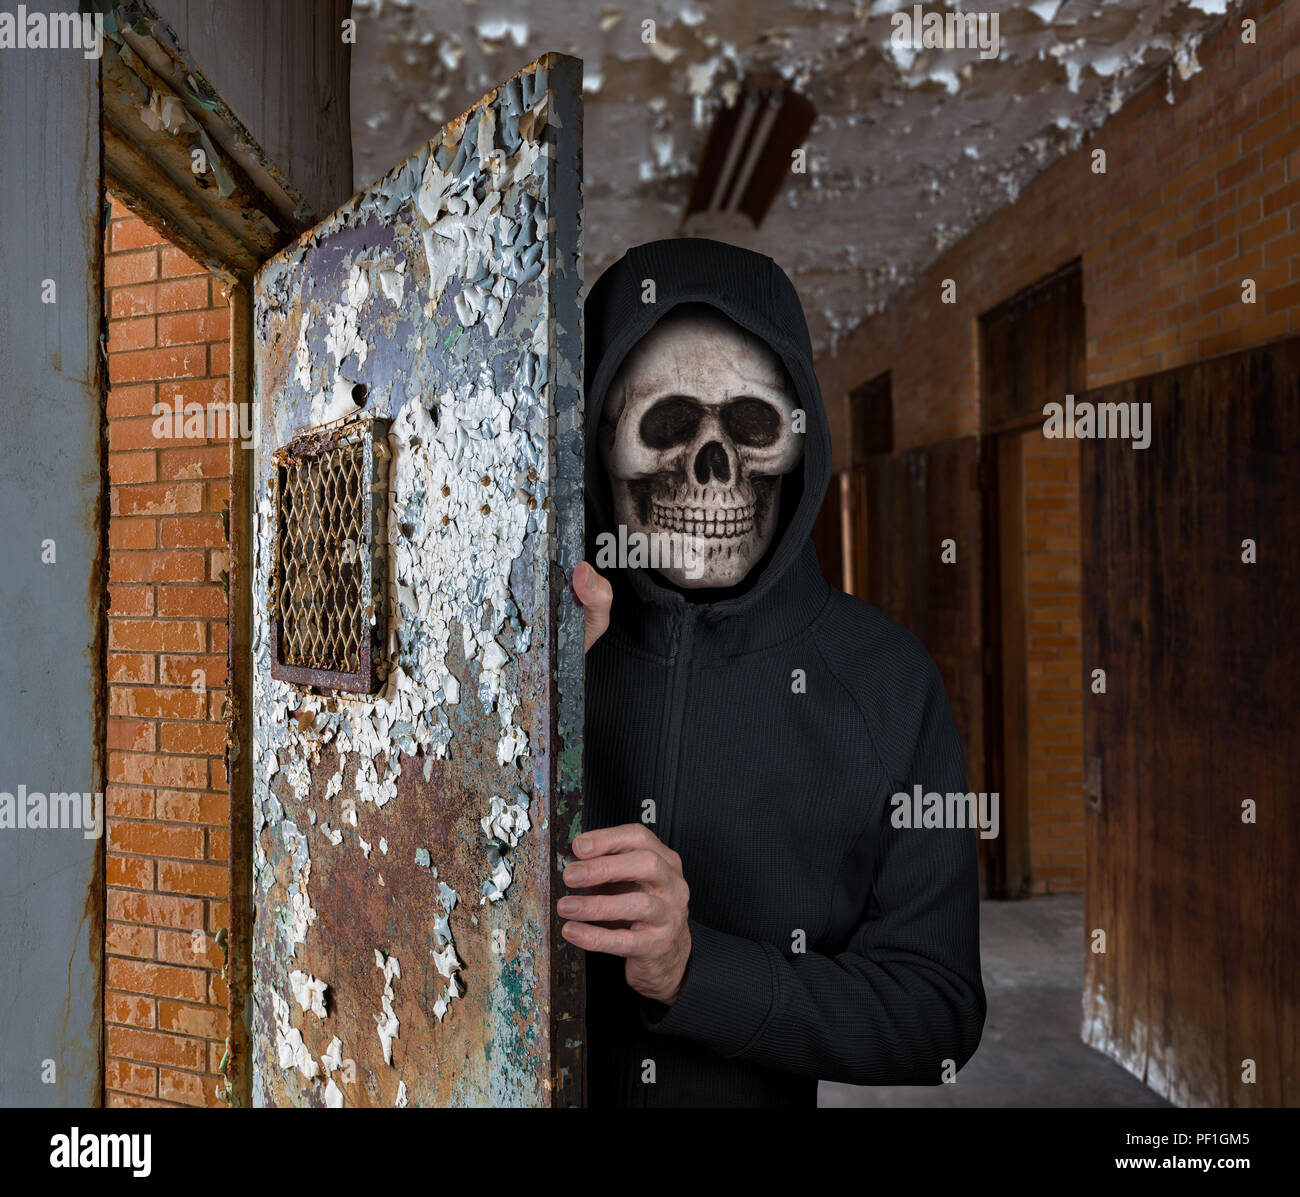 Halloween theme of man with skull mask welcoming you to prison Stock Photo